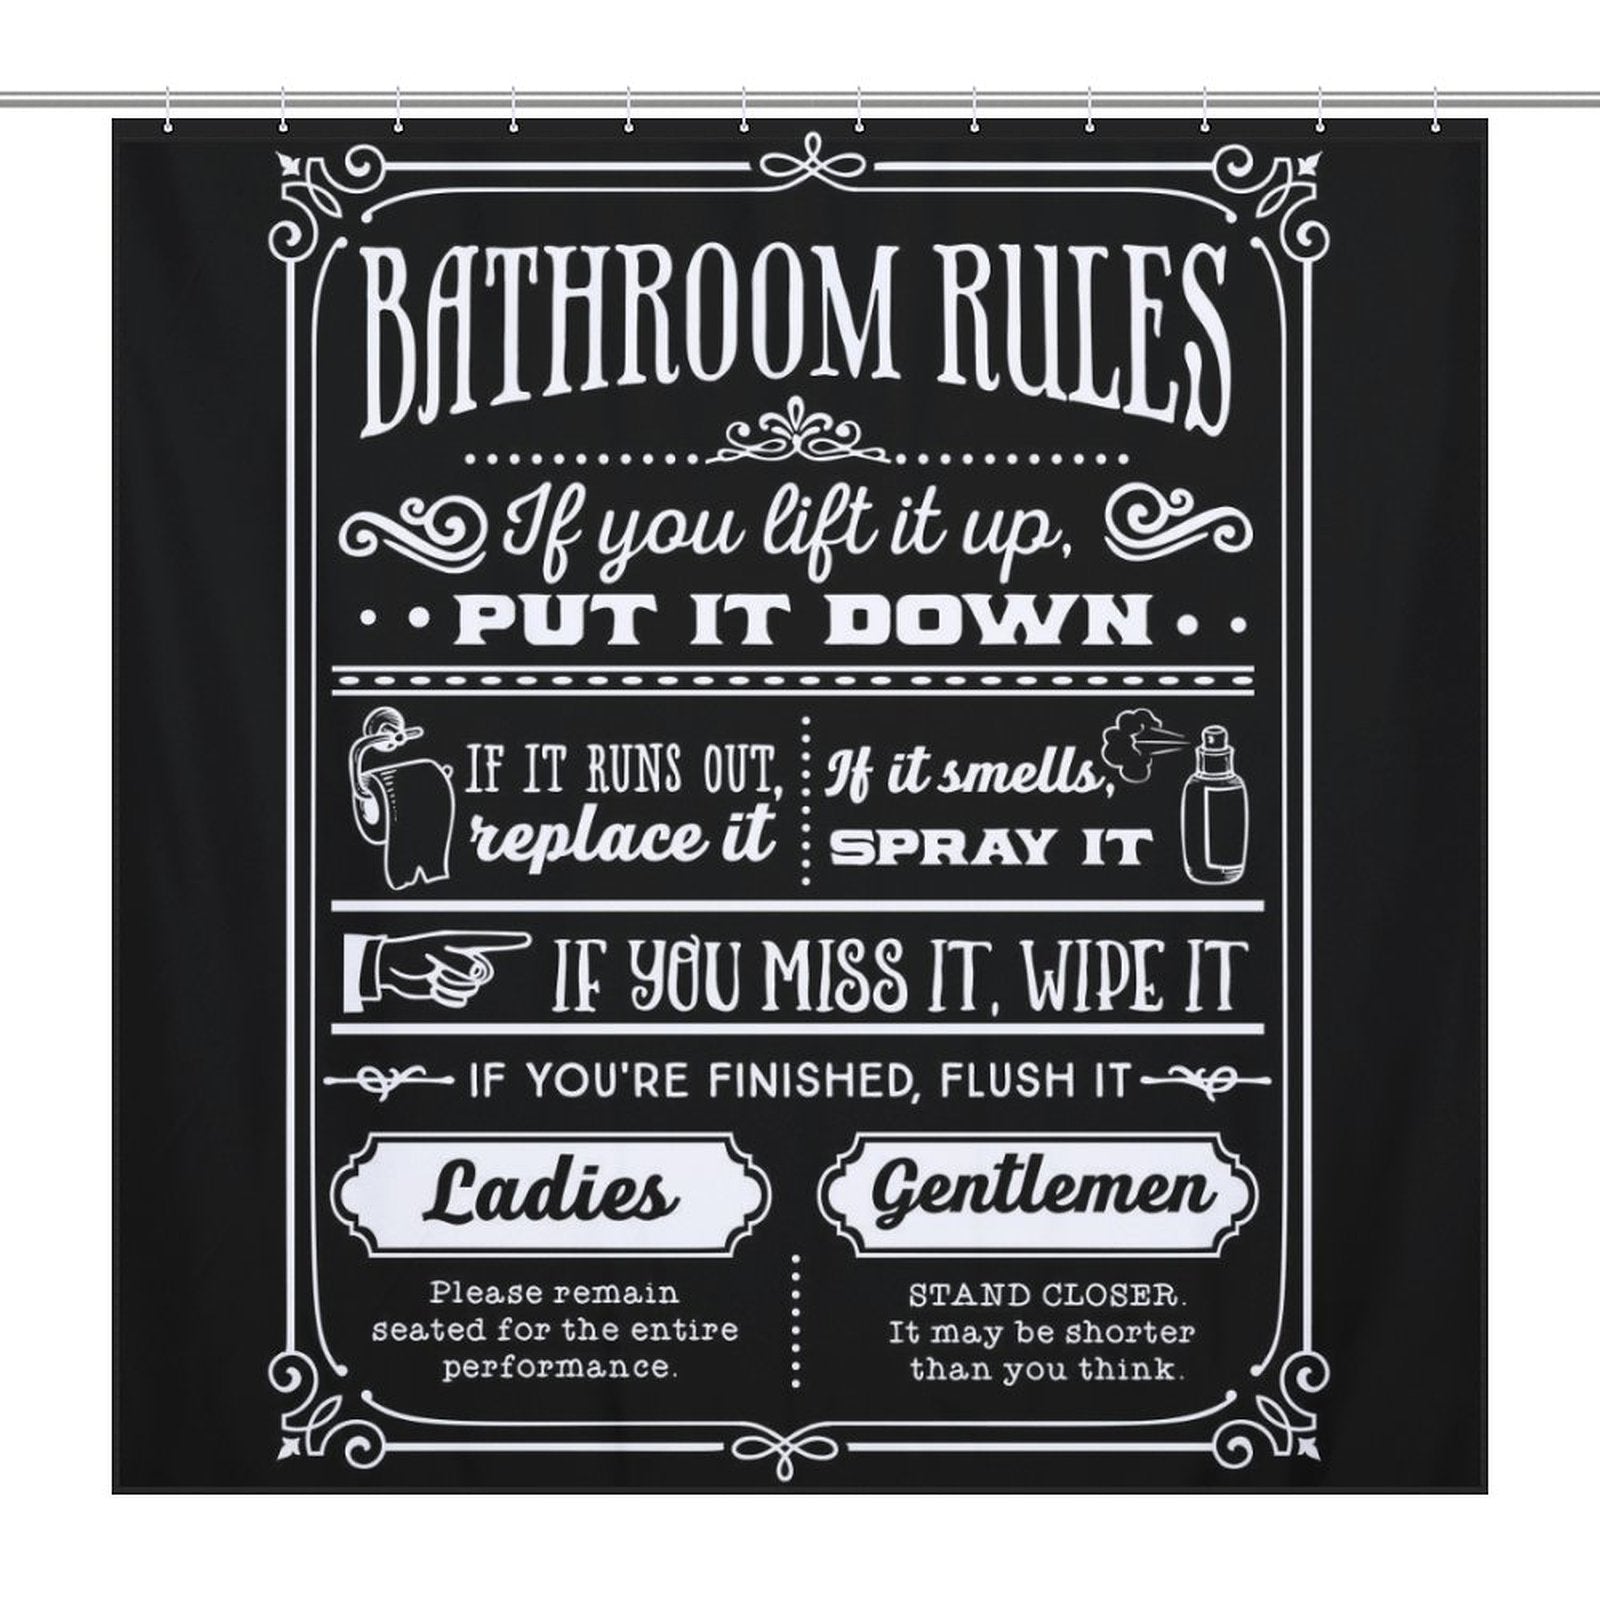 Black and white bathroom rules sign on a waterproof and mildew-resistant curtain, listing guidelines like "If you lift it up, put it down," "If it smells, spray it," and instructions for "Ladies" and "Gentlemen" with funny quotes. Product: Funny Quotes Shower Curtain Back and White Fable Motto - Cottoncat by Cotton Cat.